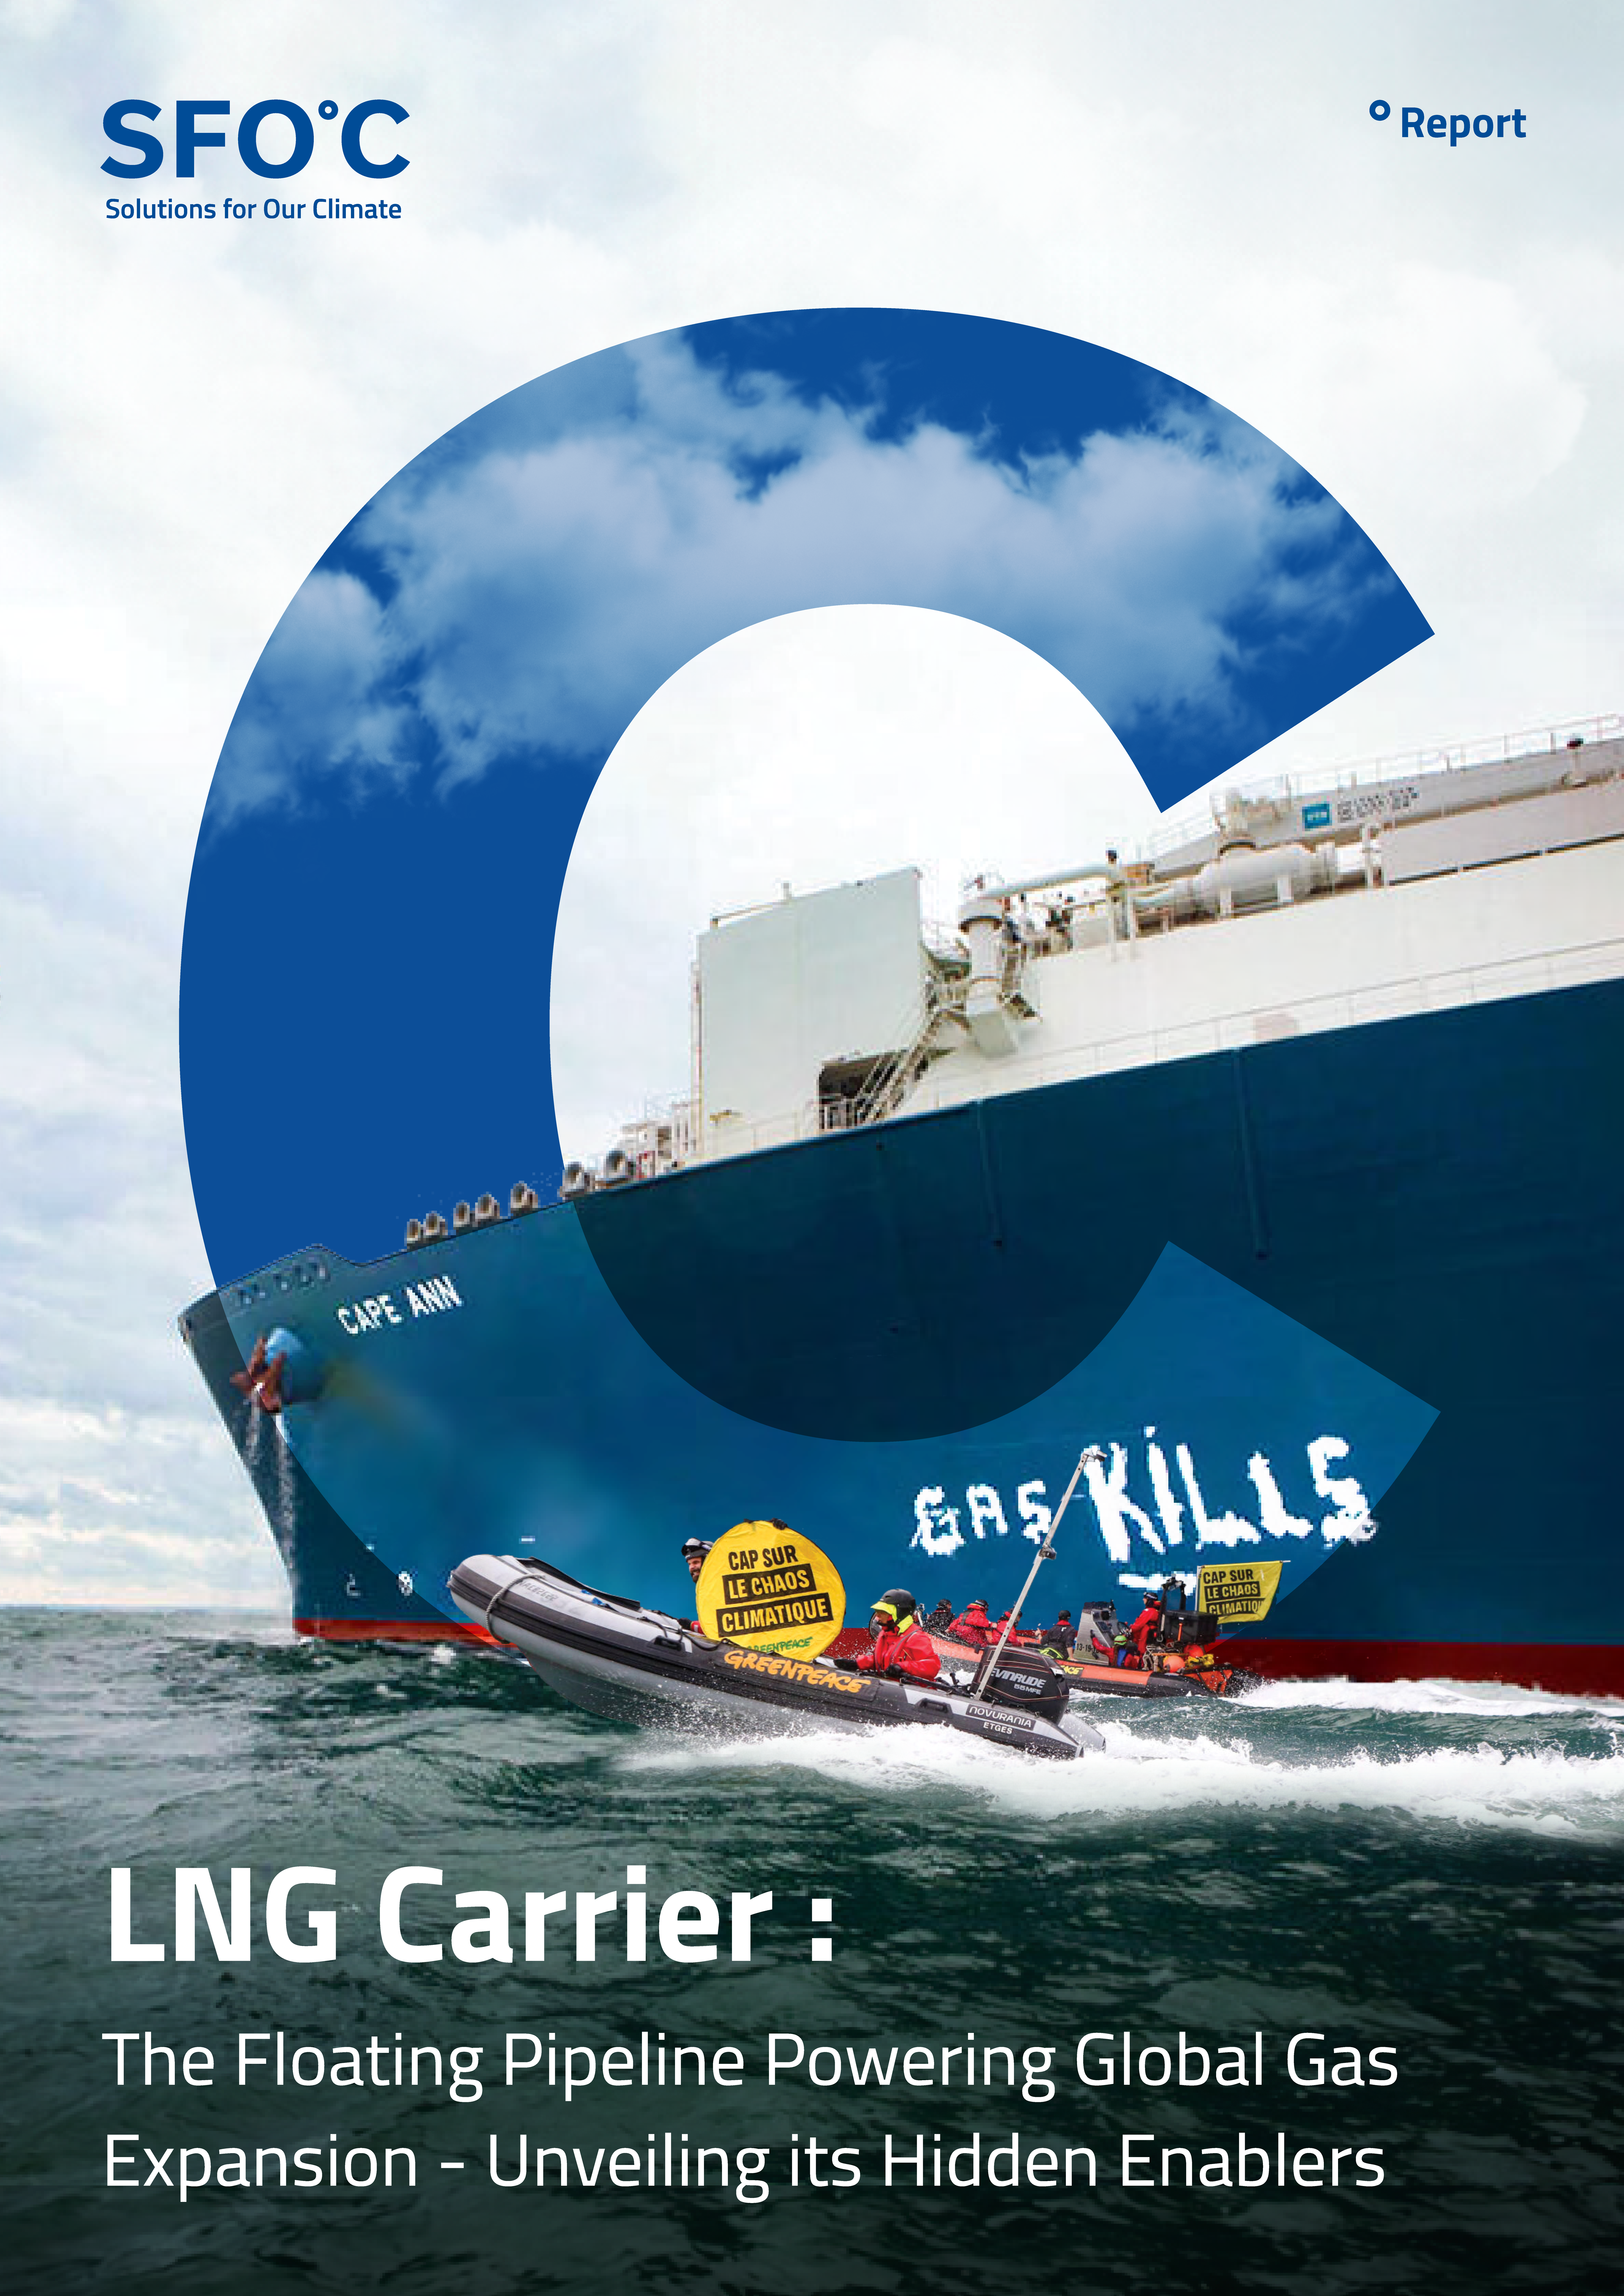 LNG Carriers: The Floating Pipeline Powering Global Gas Expansion - Unveiling its Hidden Enablers